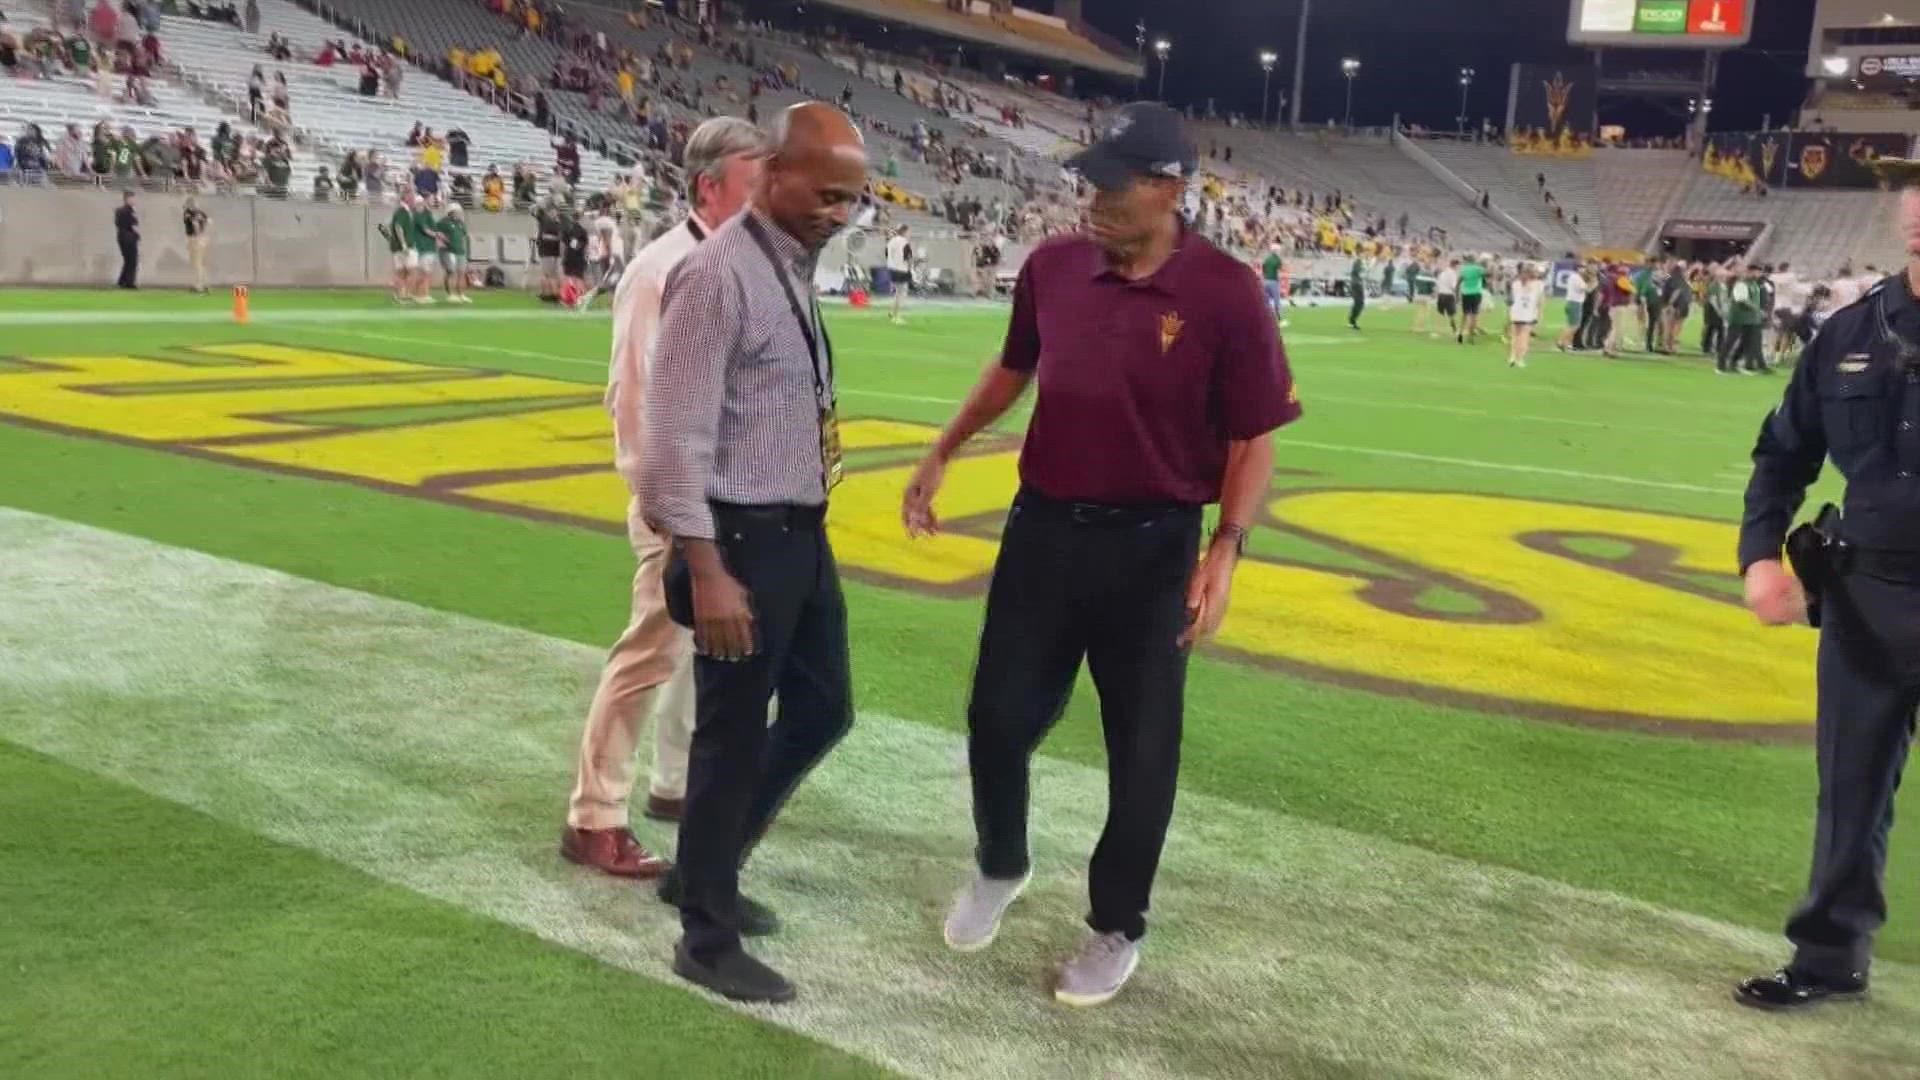 Arizona State University could be on the hook for a $9 million buyout of Edwards' contract.